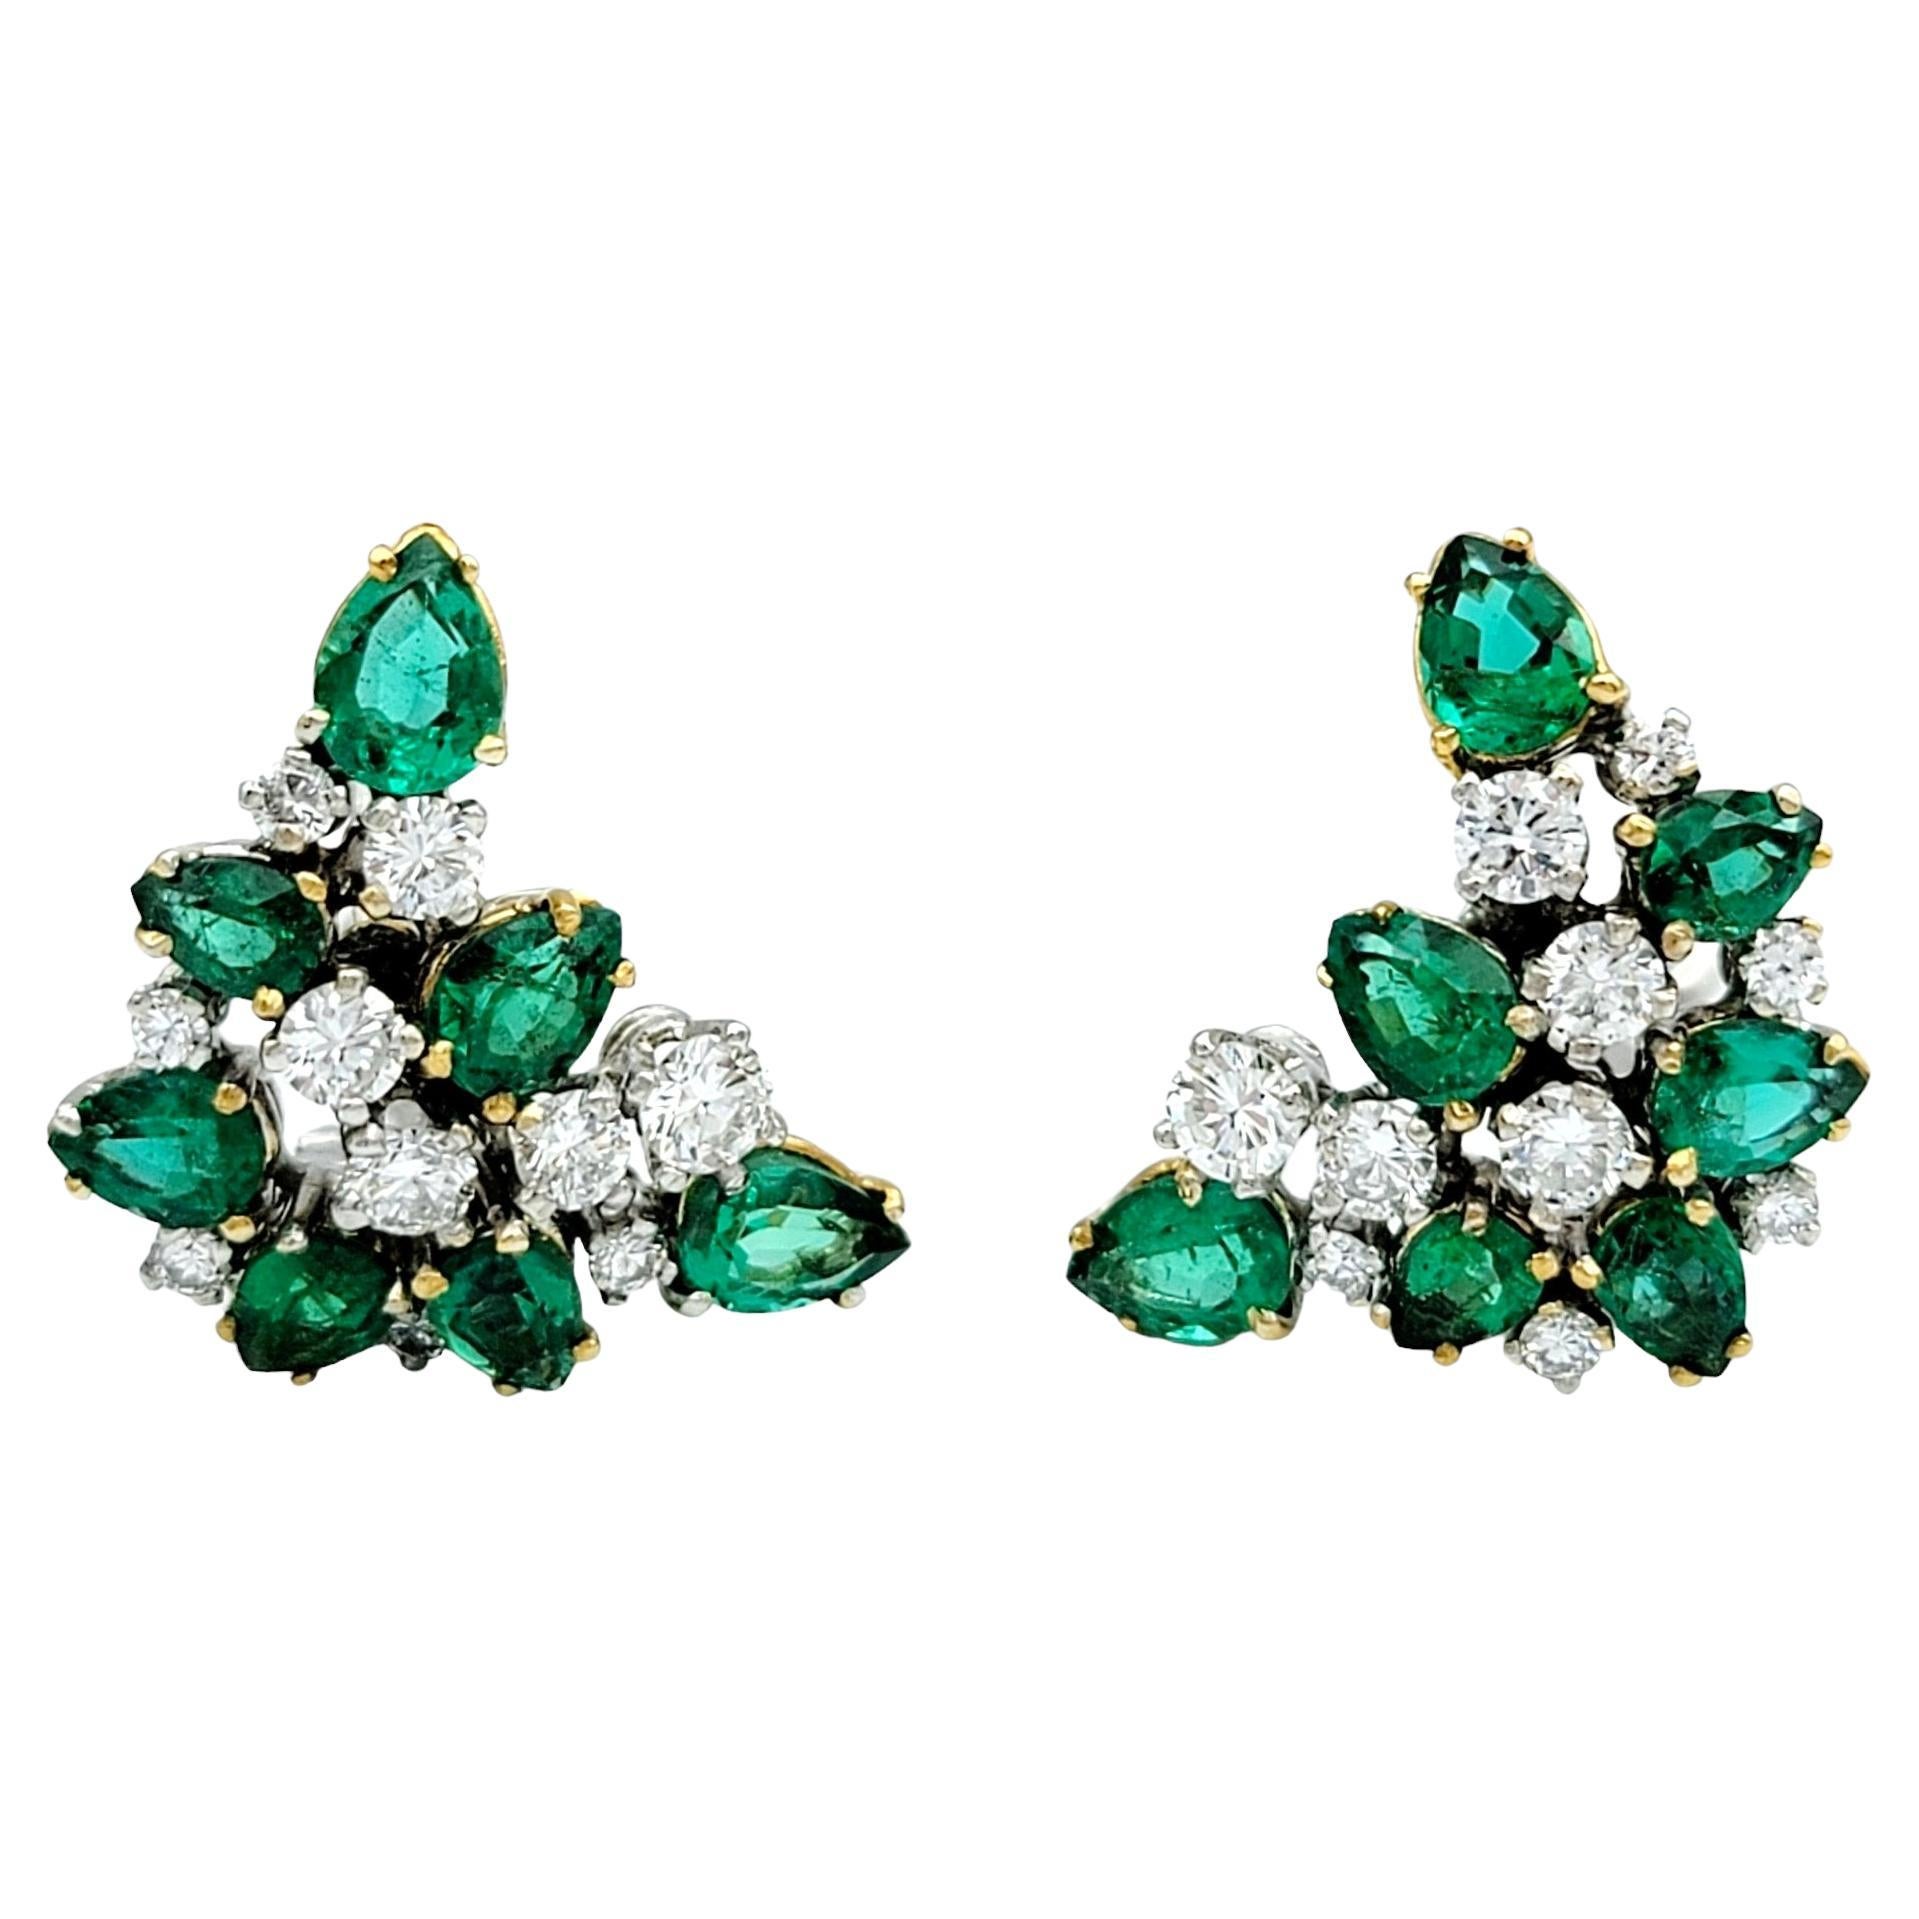 Pear Cut Emerald and Round Brilliant Diamond Cluster Earrings in 18 Karat Gold